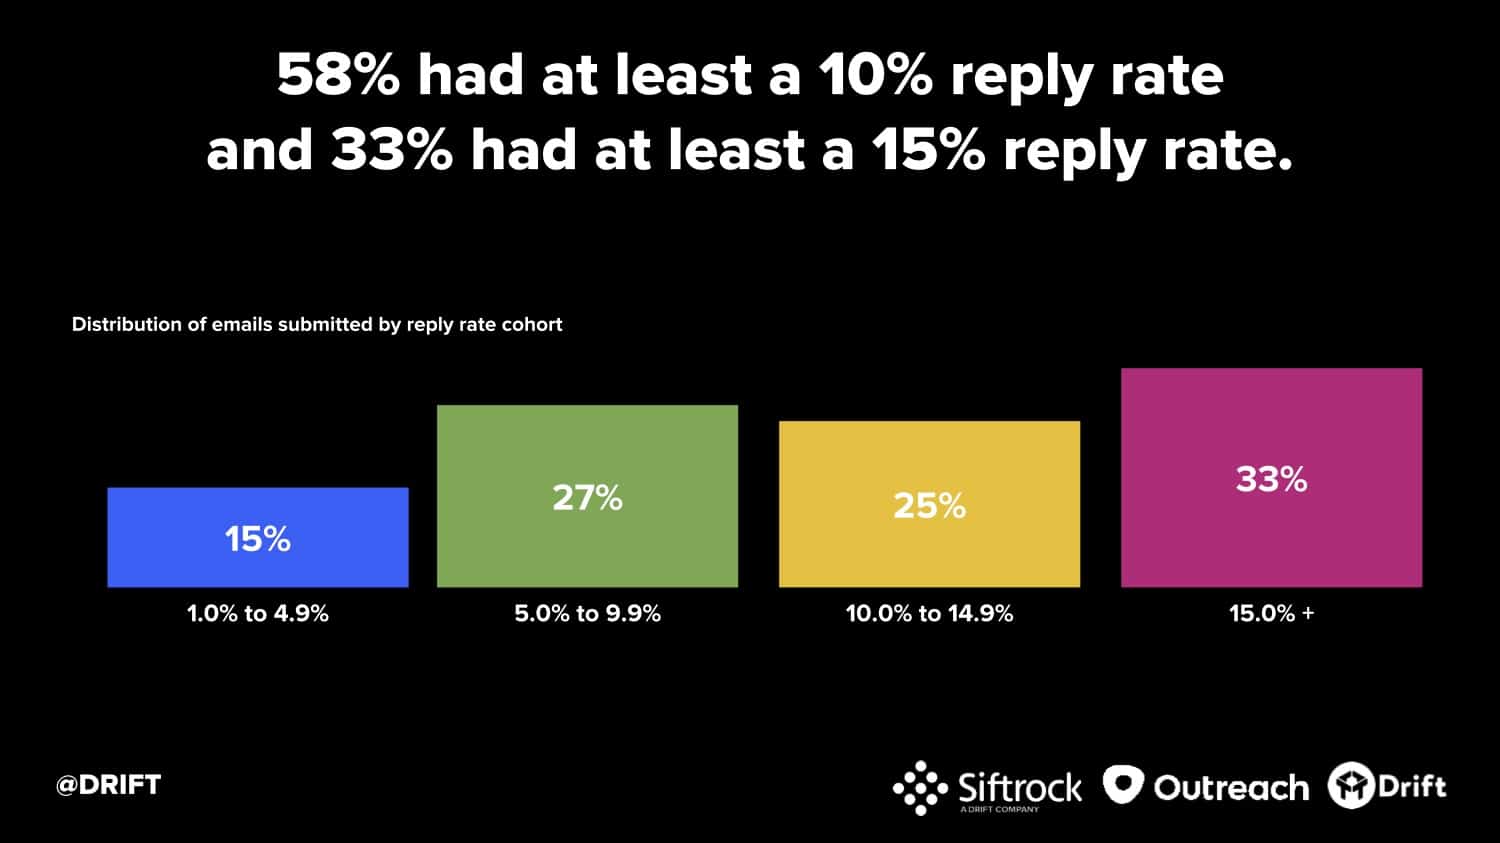 Drift cold email study reply rate cohorts